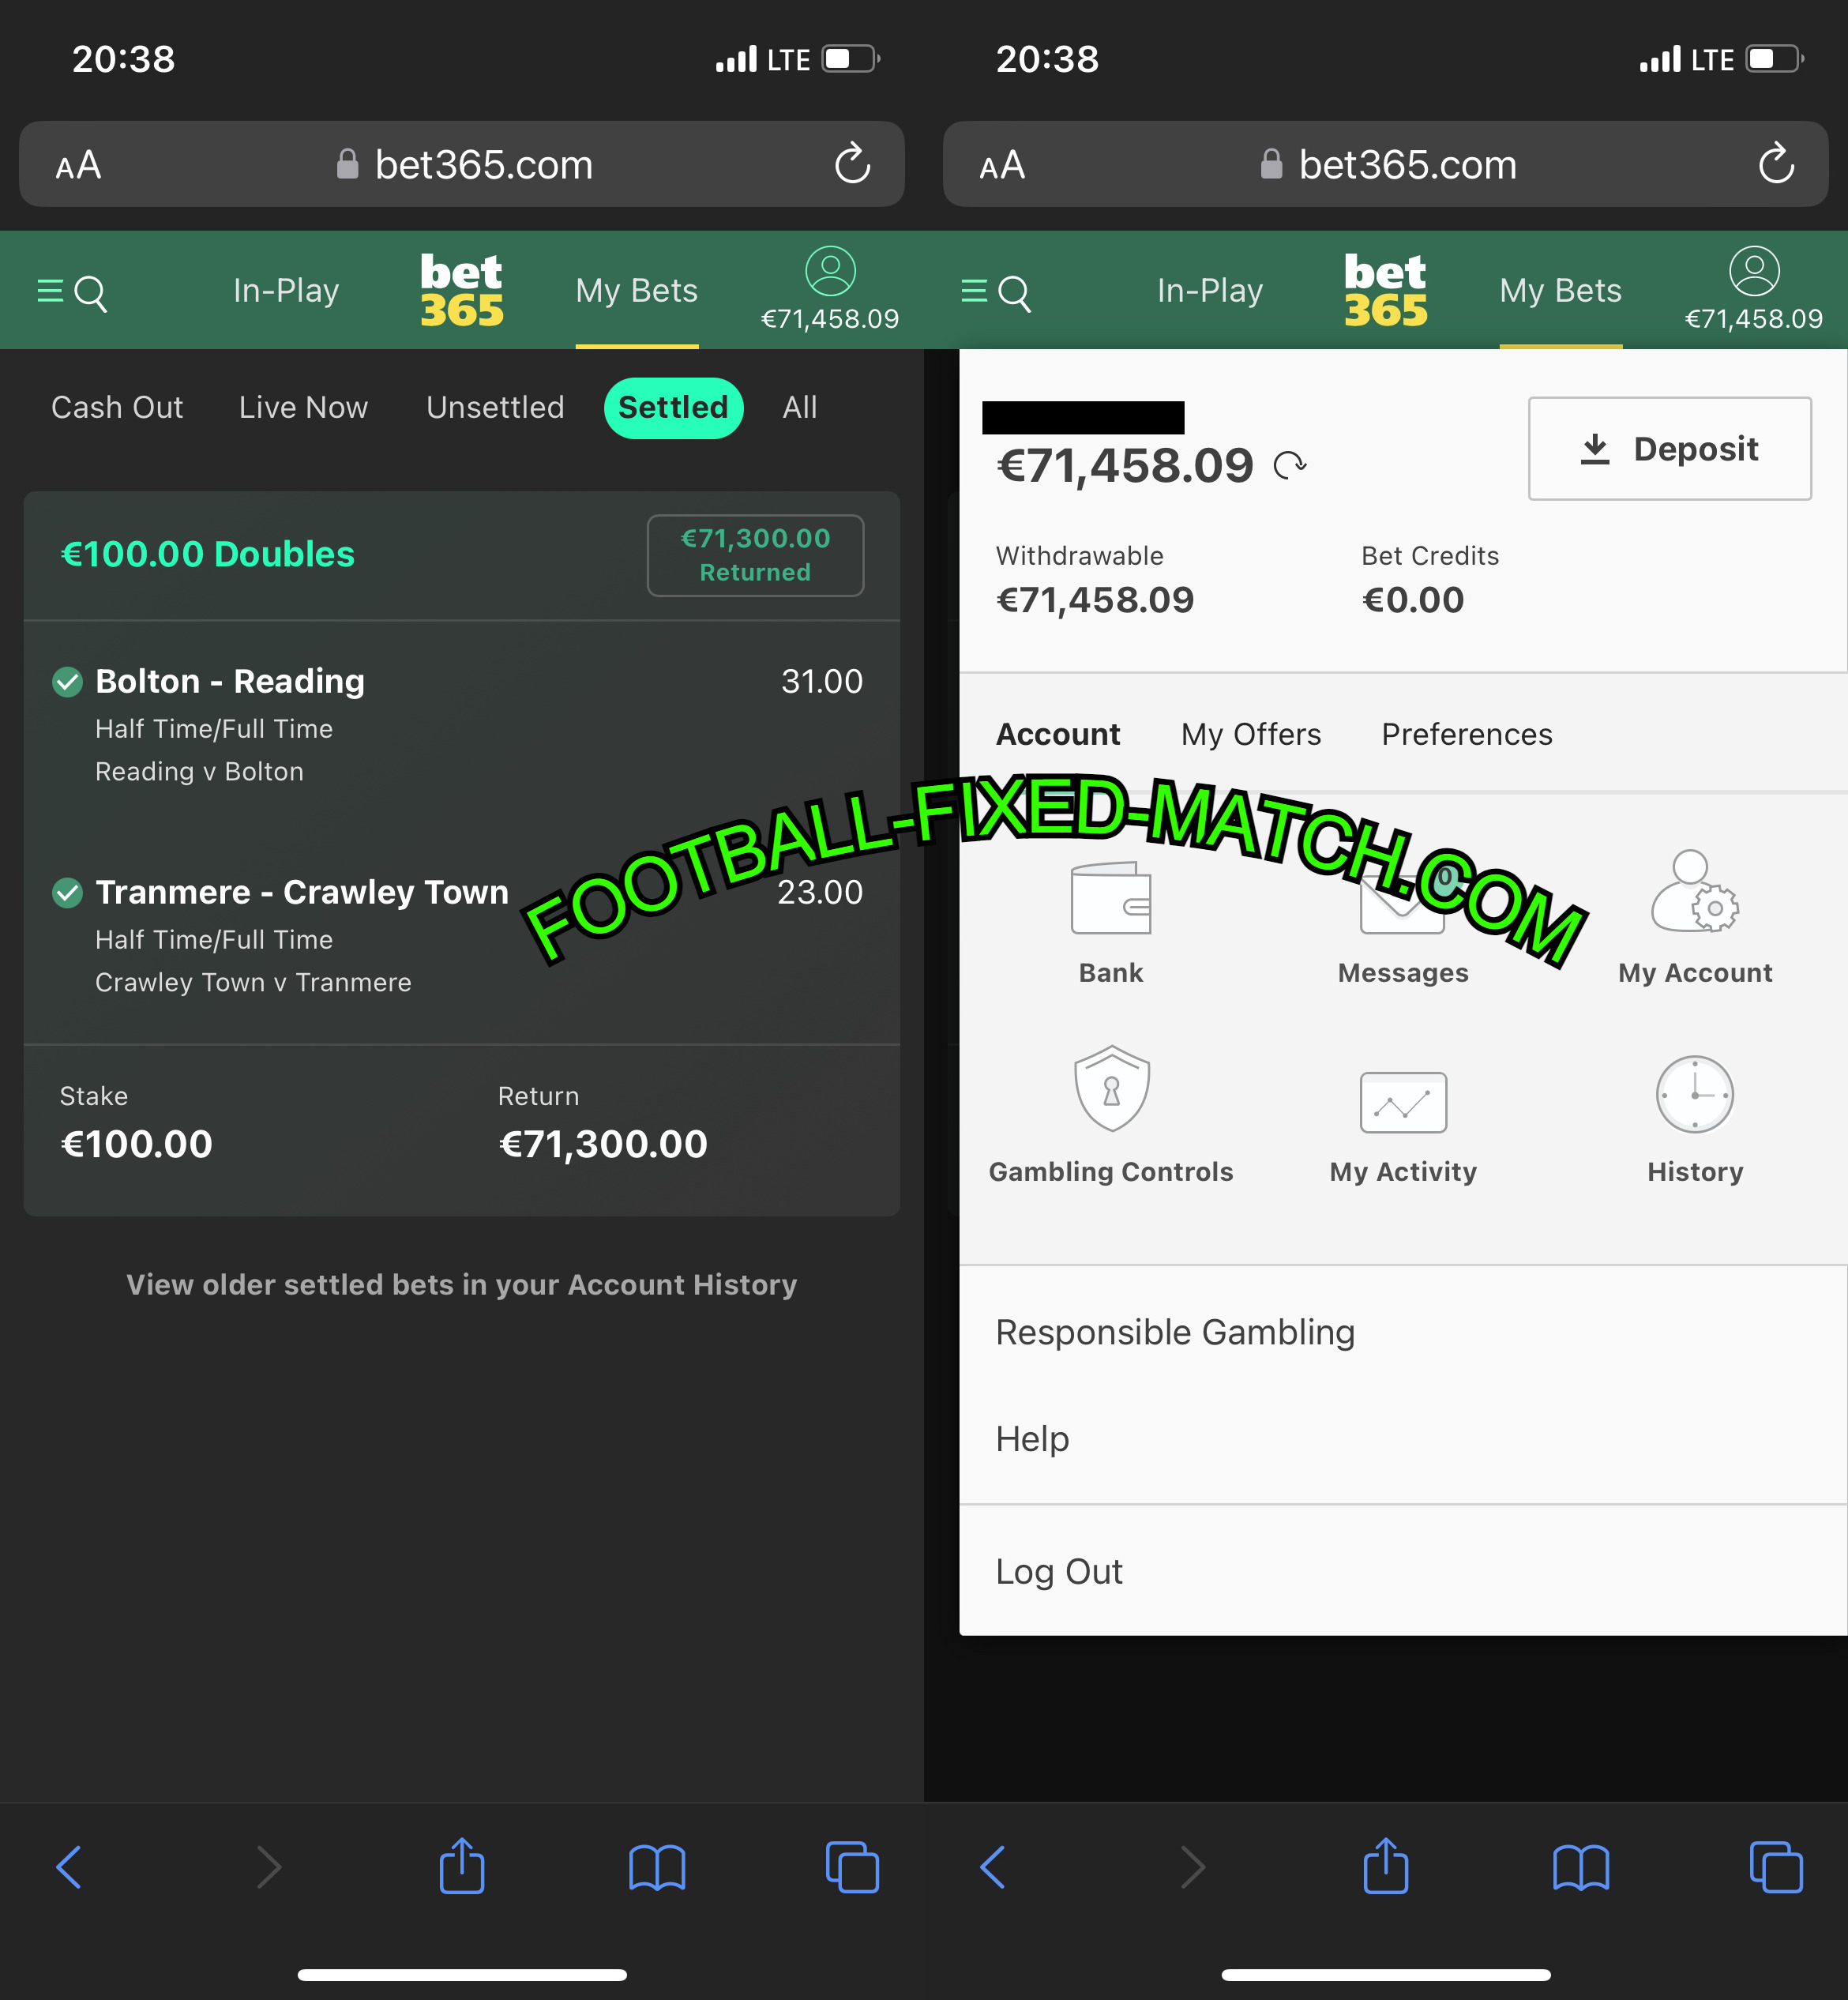 FOOTBALL HT FT FIXED MATCHES DOUBLE